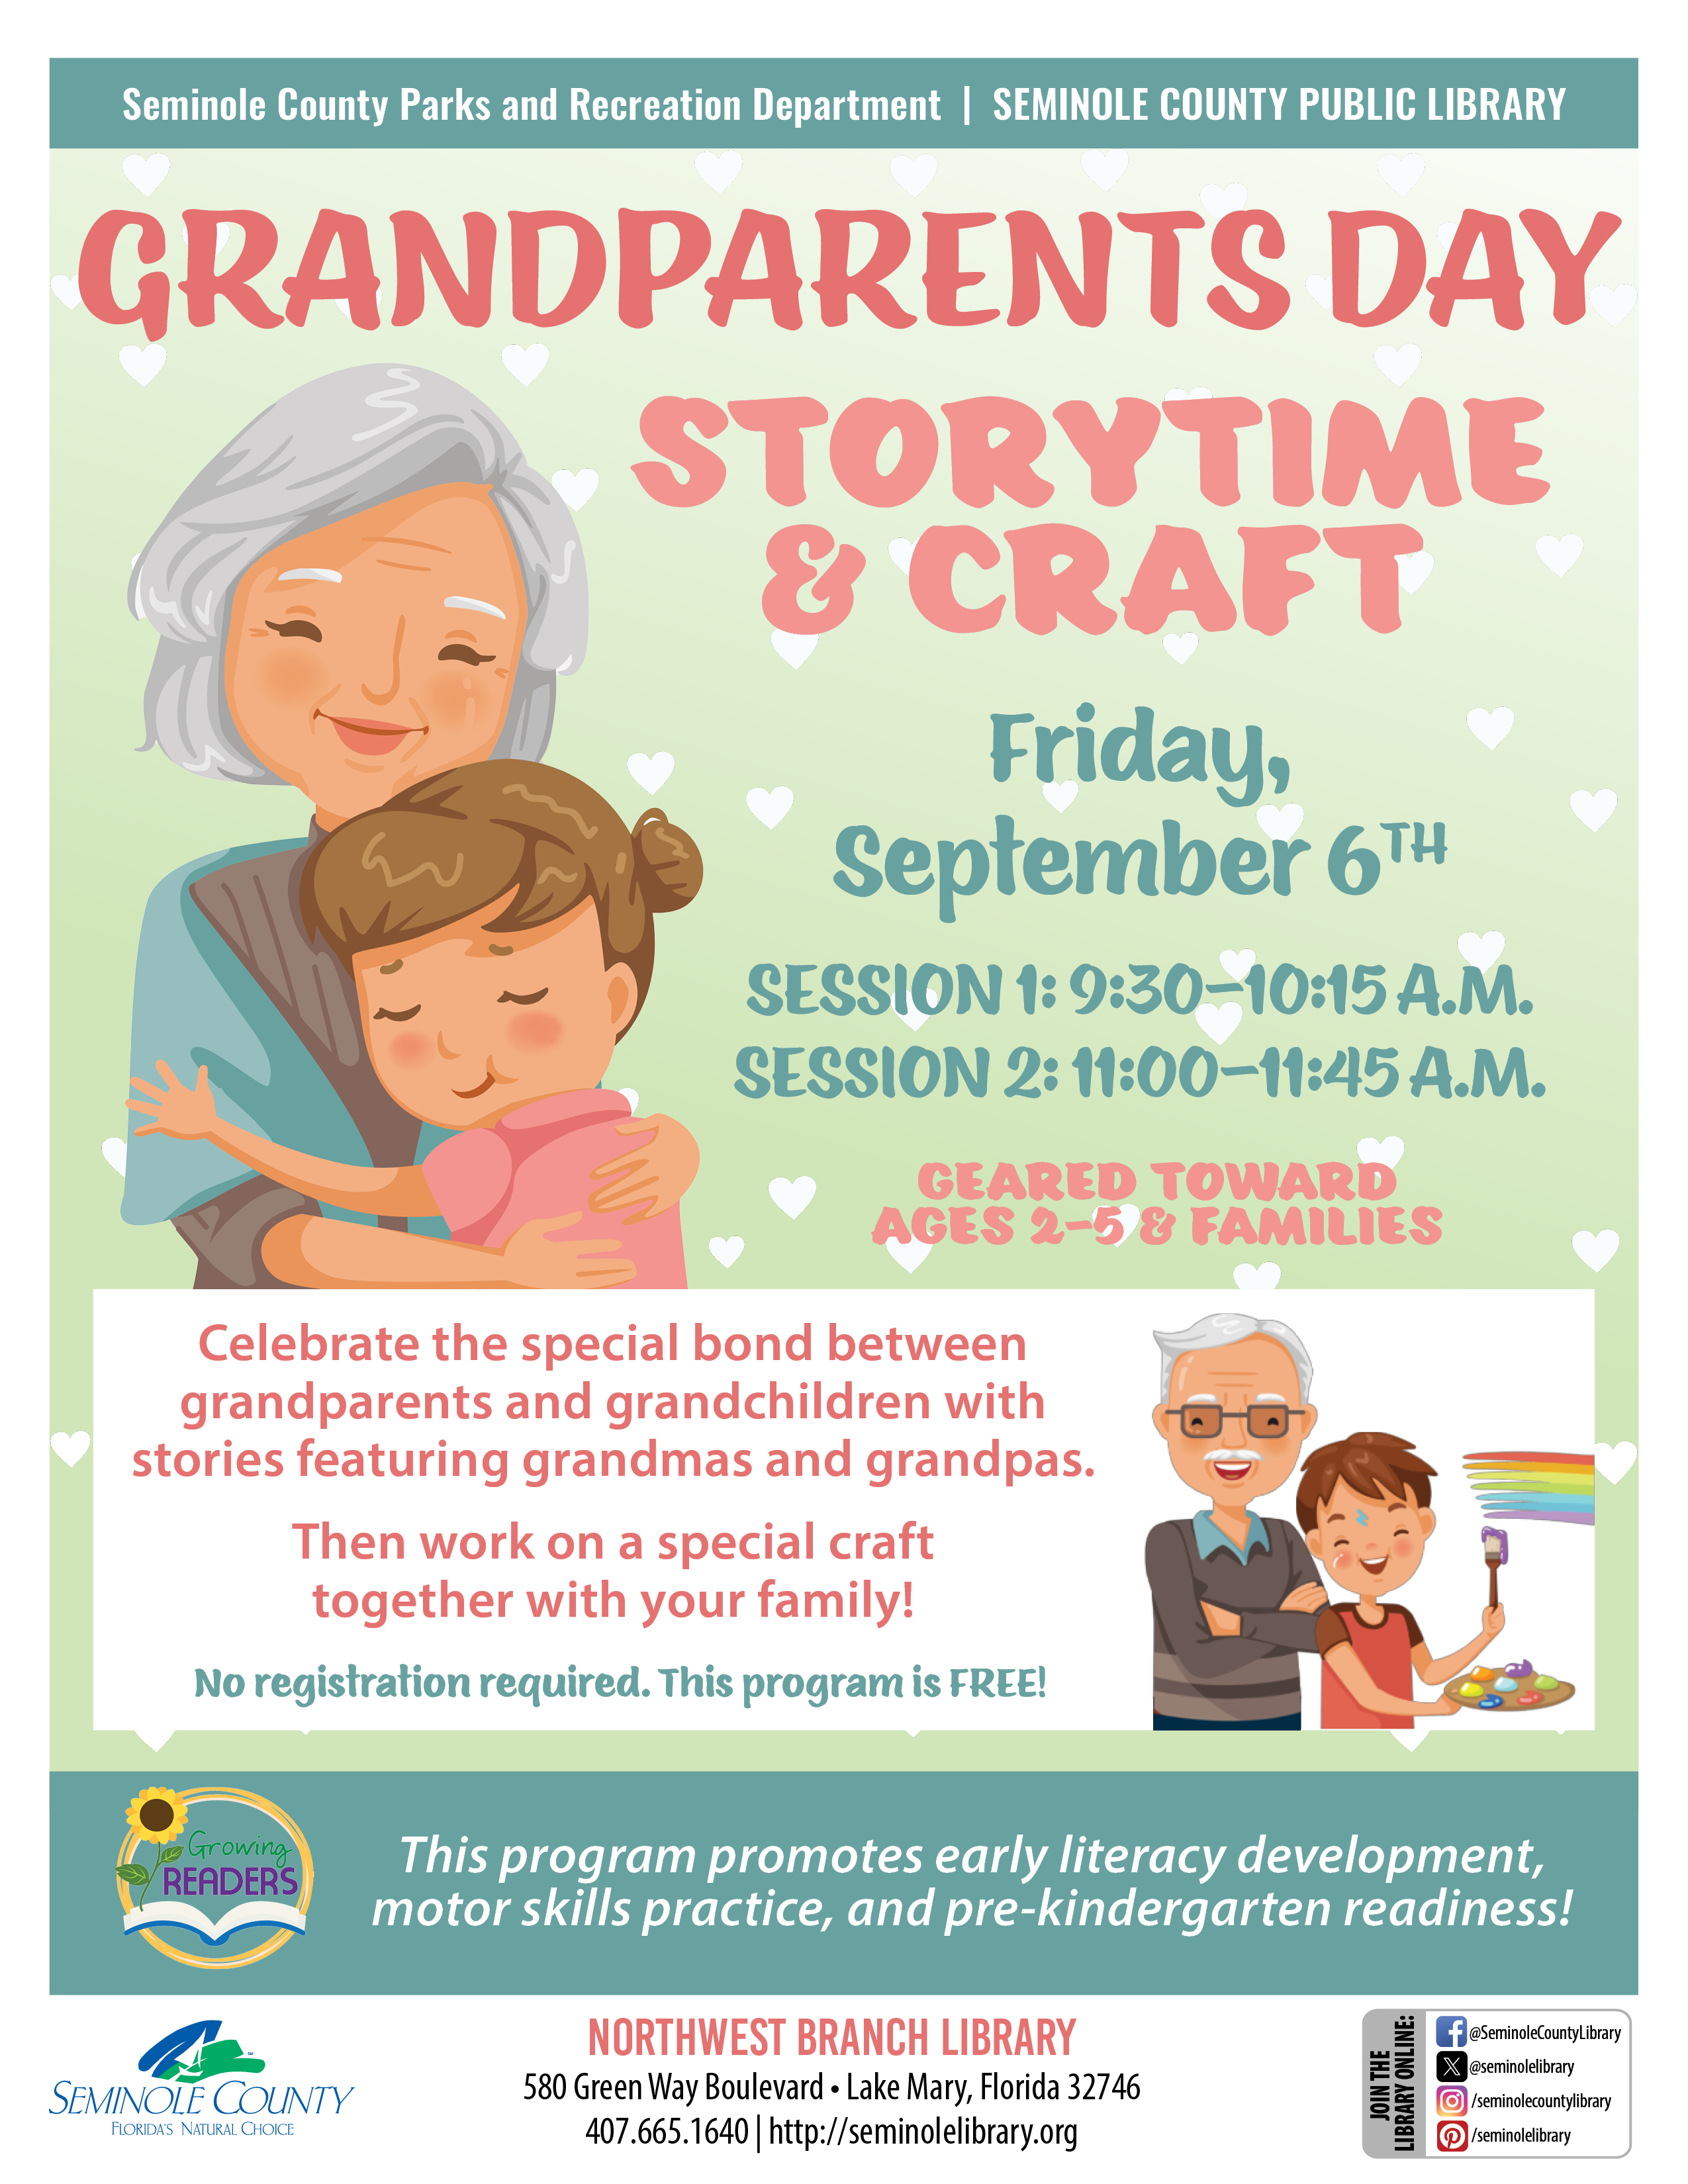 Grandparents Day Storytime and Craft